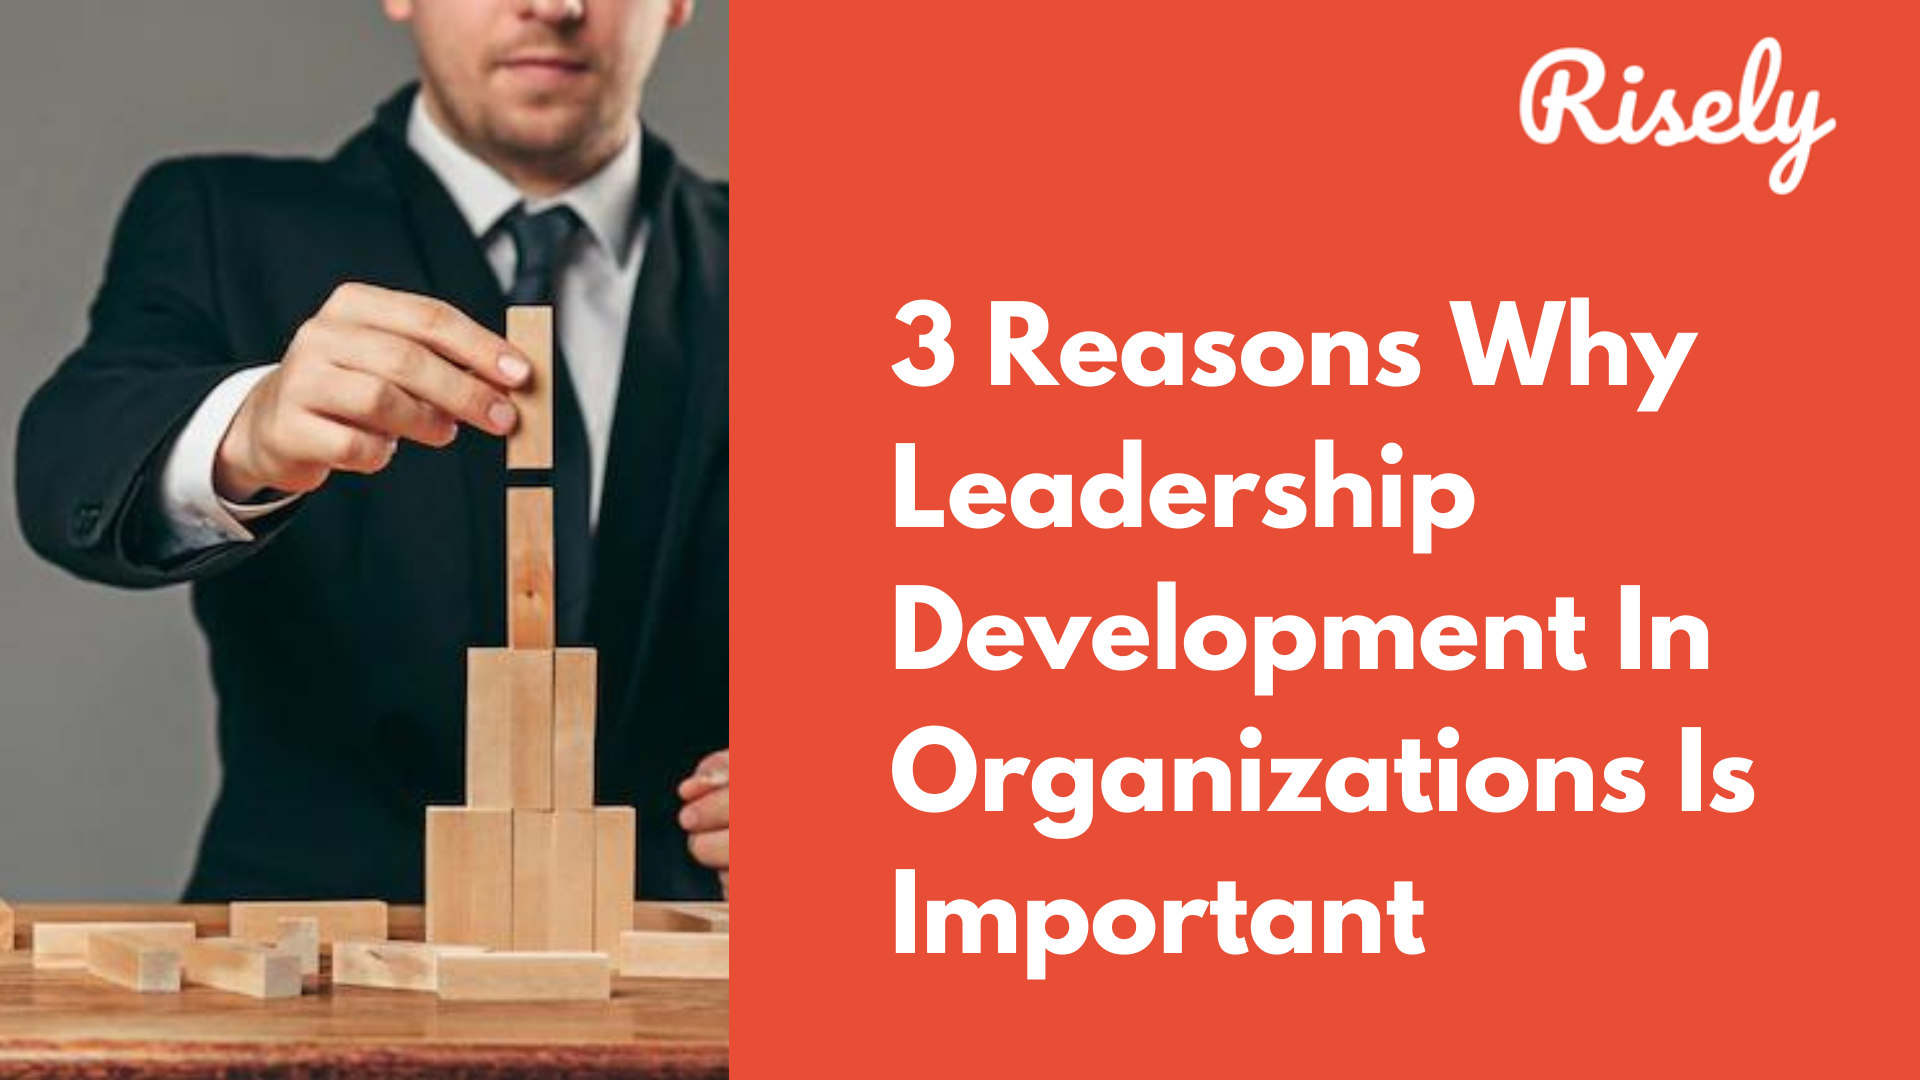 5 Reasons Why Leadership Development In Organizations Is Important